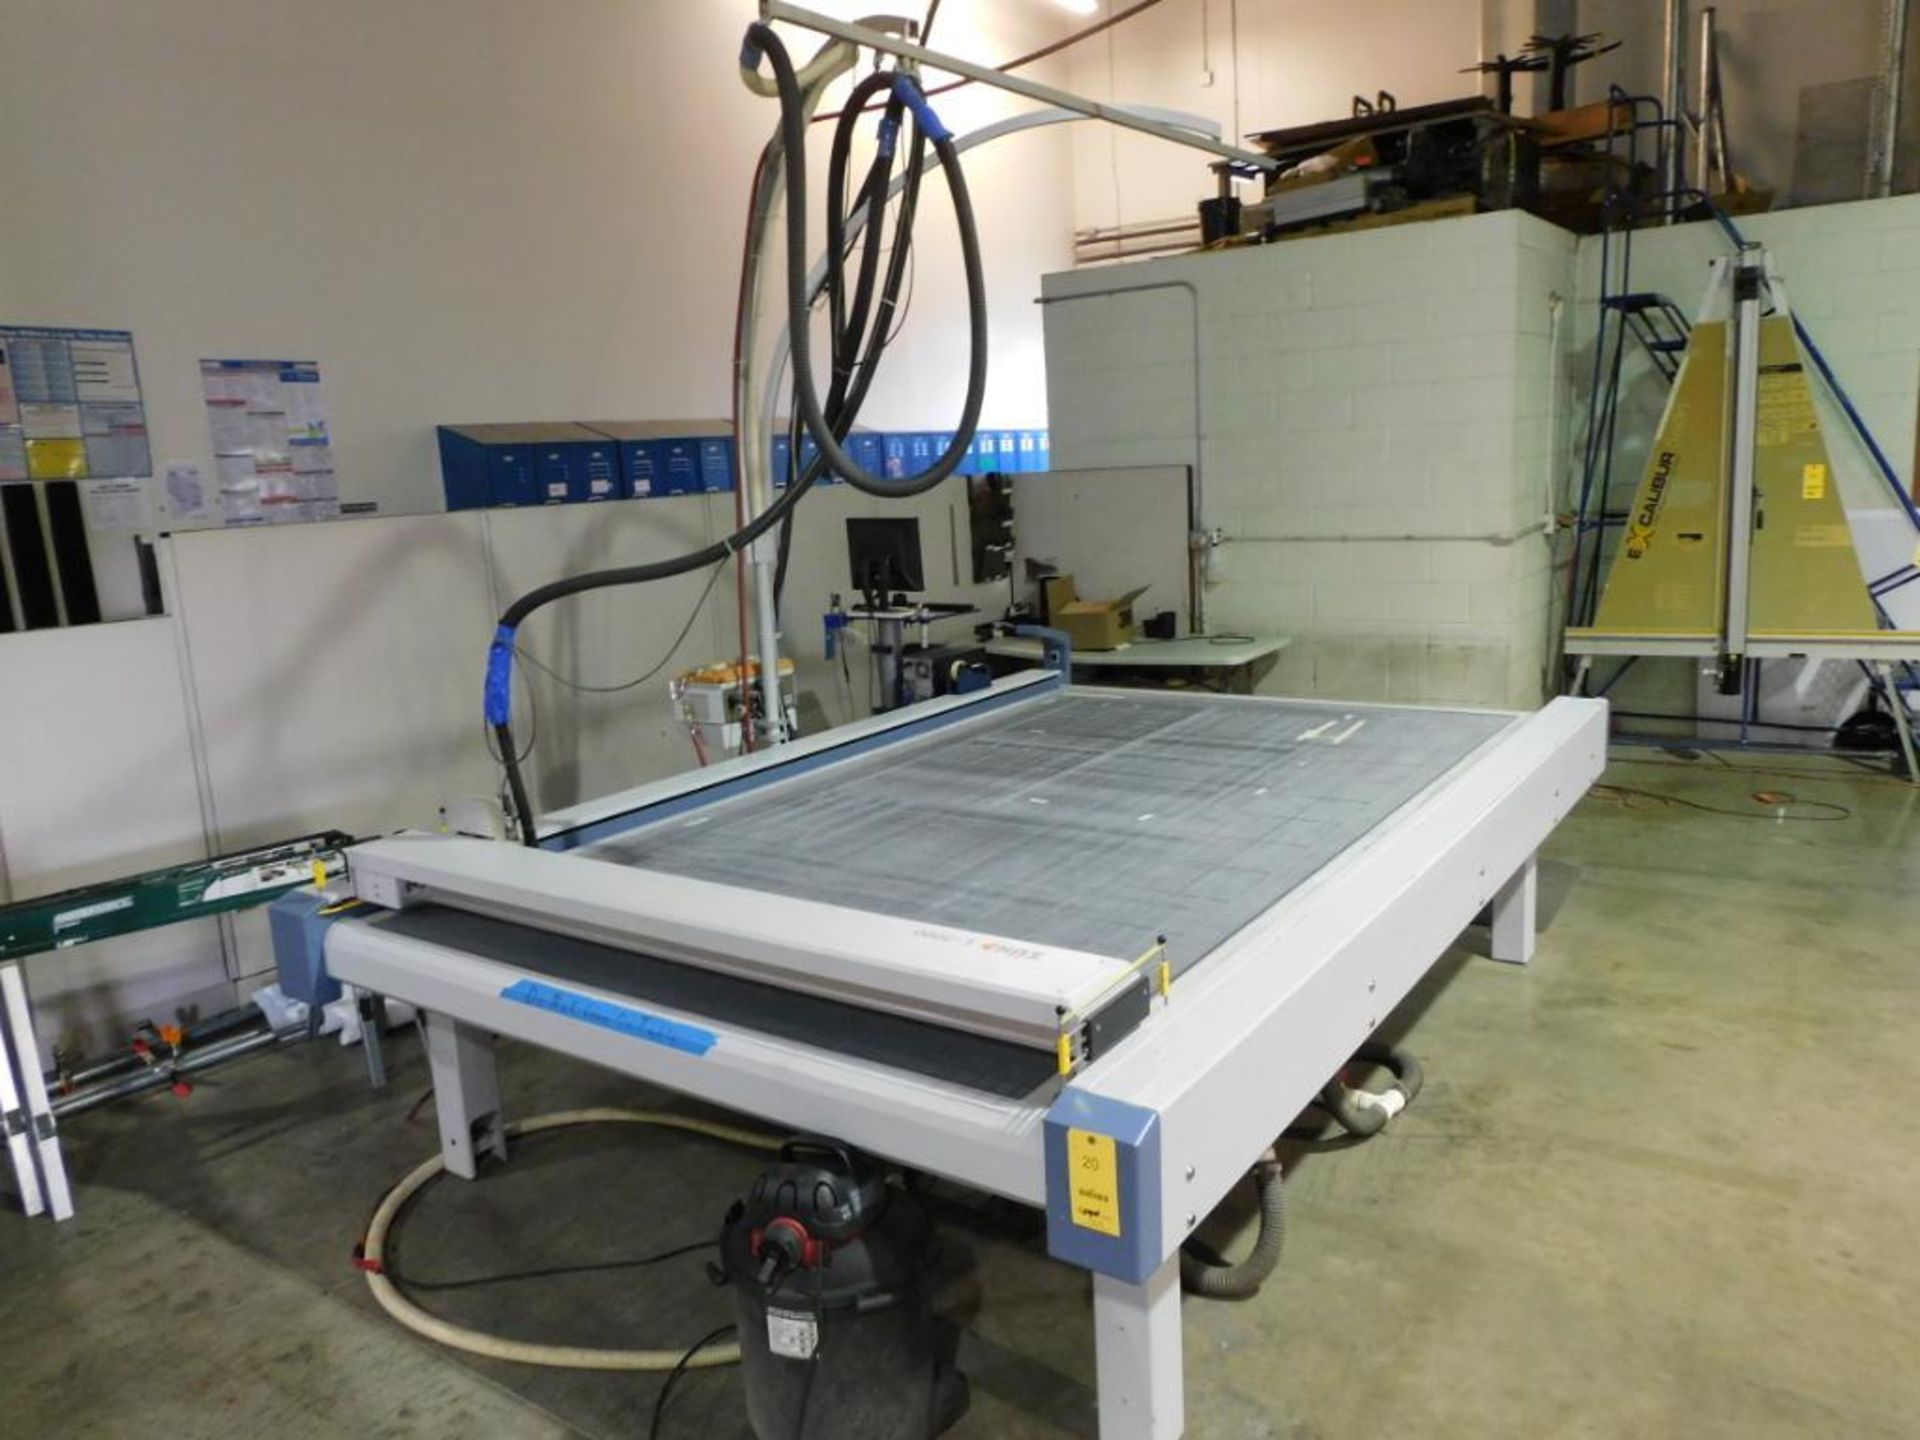 Zund L 3000 Cutting Table (2004), with Computer - Image 8 of 8